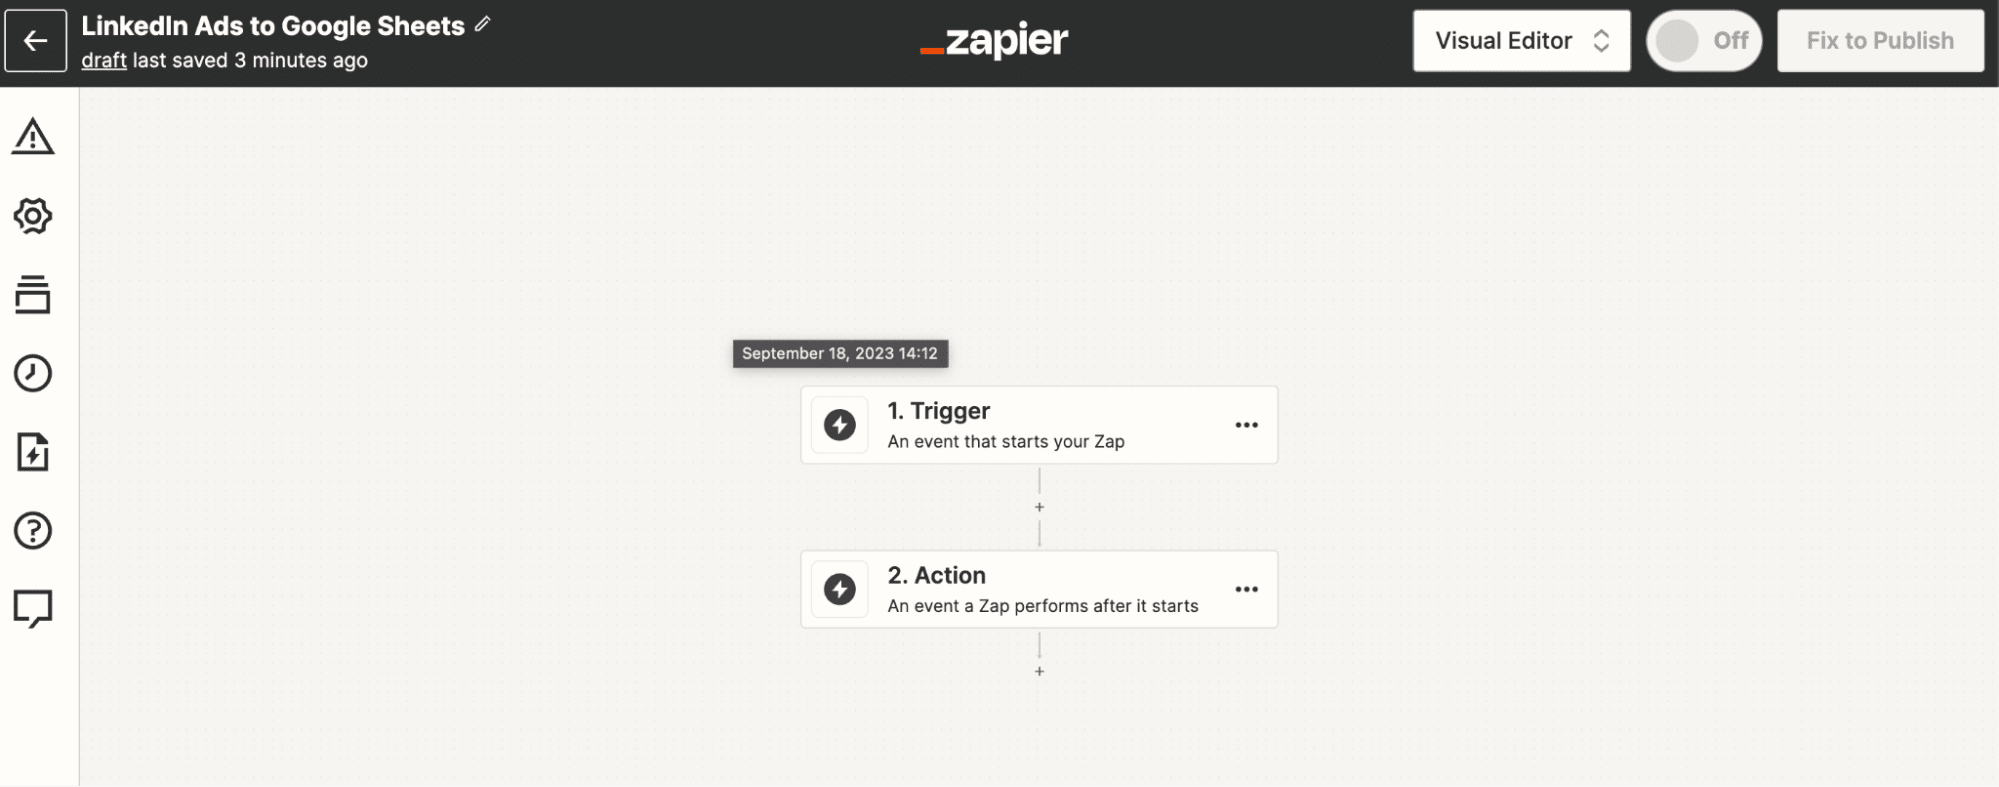 This will take you to the Zapier Visual Editor.